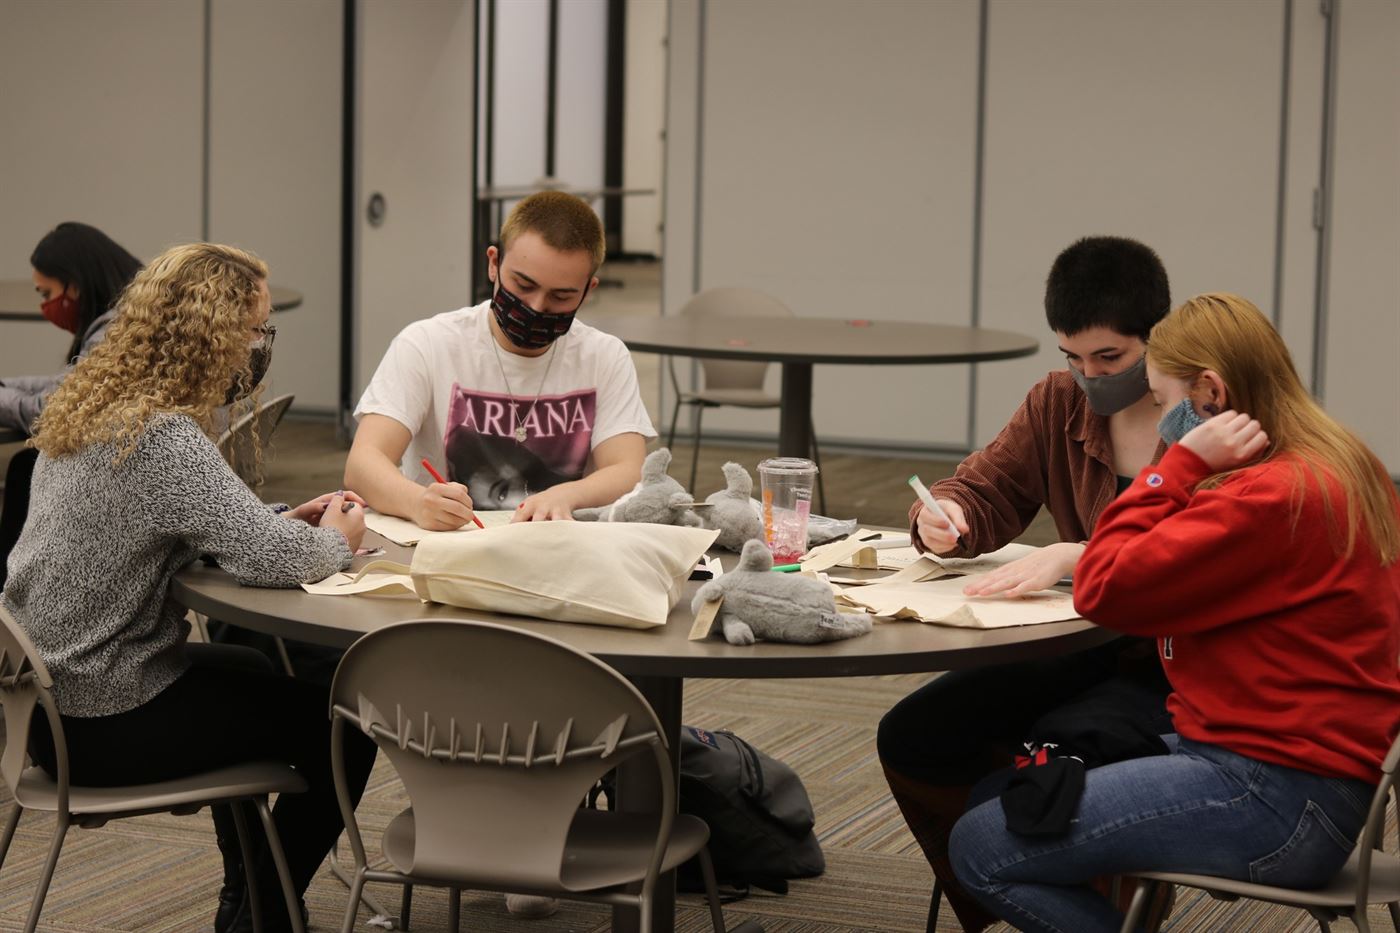 Students make stuffed friends and decorate tote bags at the Student Center. Kyra Maffia | The Montclarion